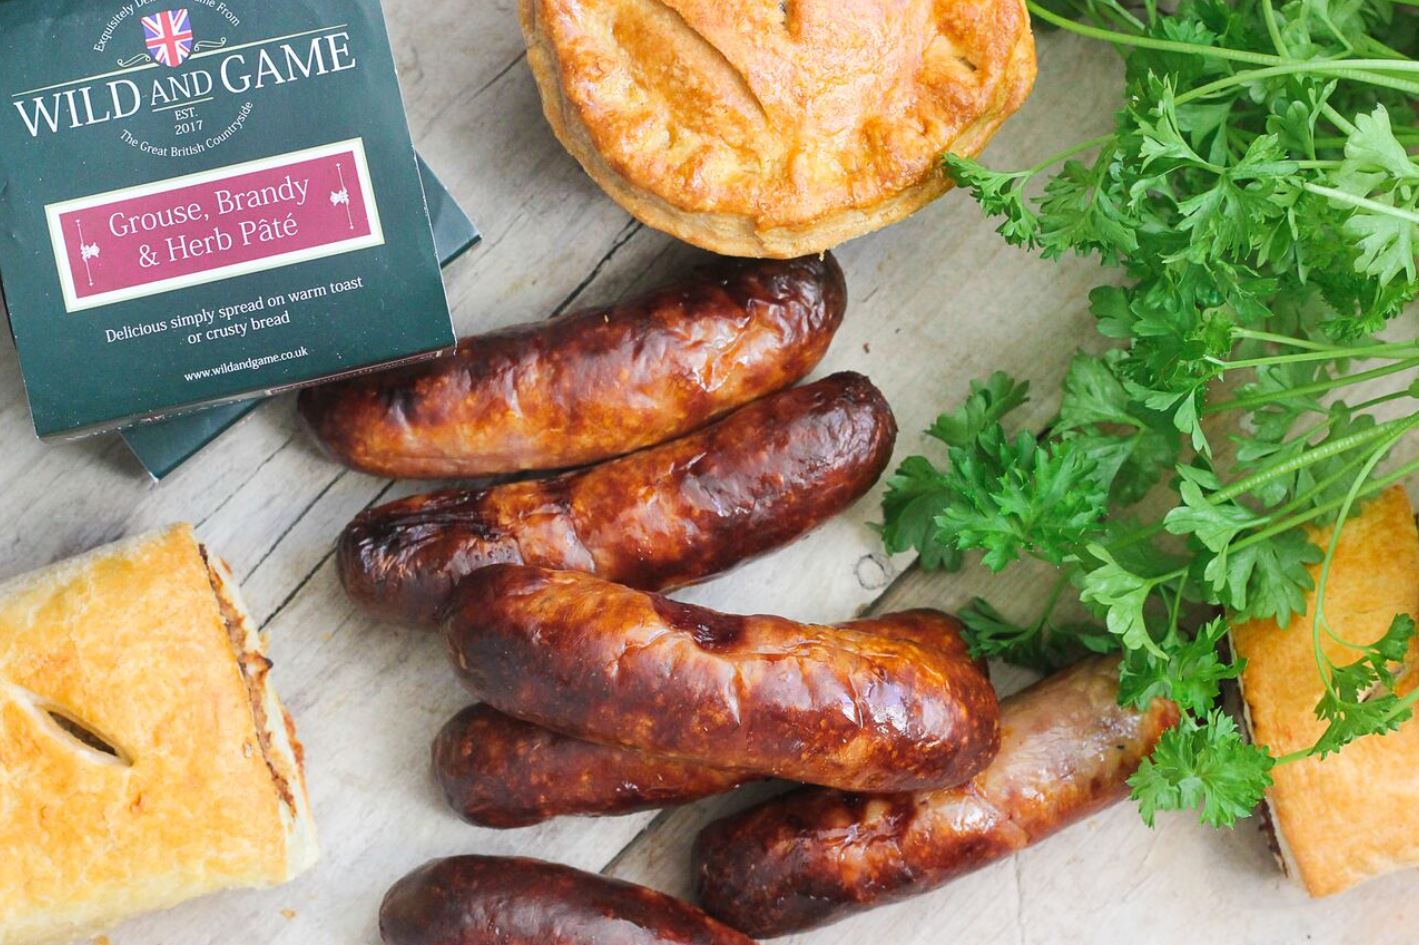 NEW FOOD PRODUCER CHAMPIONS GREAT BRITISH GAME